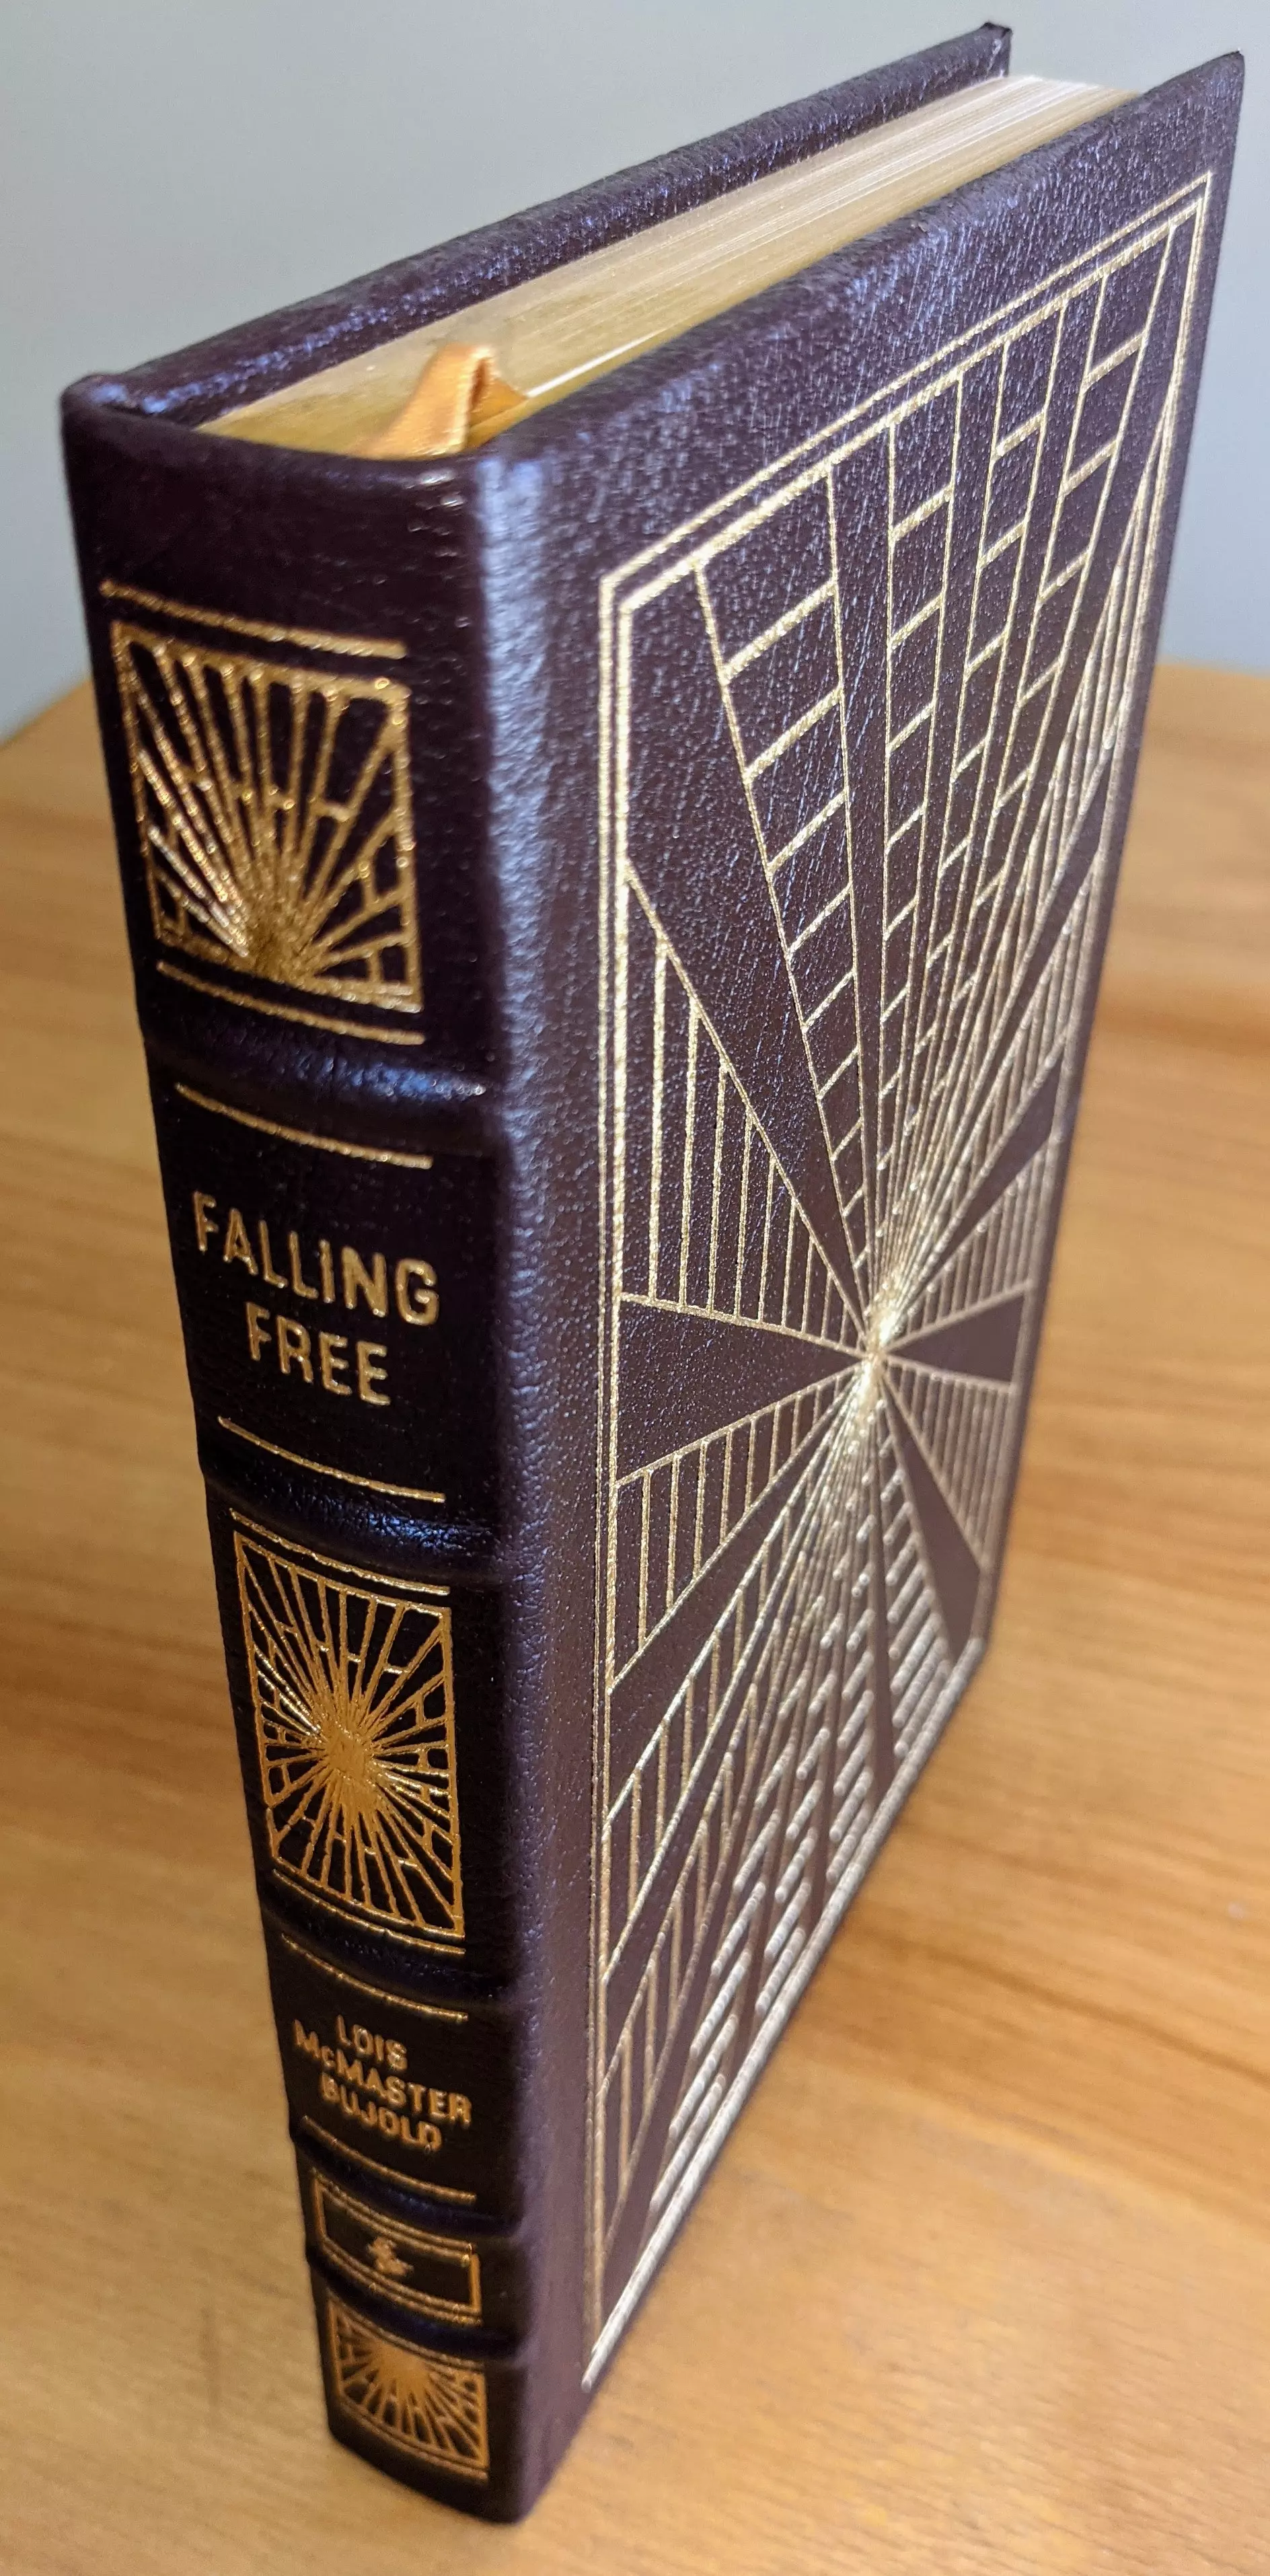 Stunning Dark Wine Leather Bound hardback book with hubbed spine, cover artwork in 22kt gold, printed on archival paper with gold gilded edges, smyth sewing & concealed muslin joints
	  - original artwork by Unknown